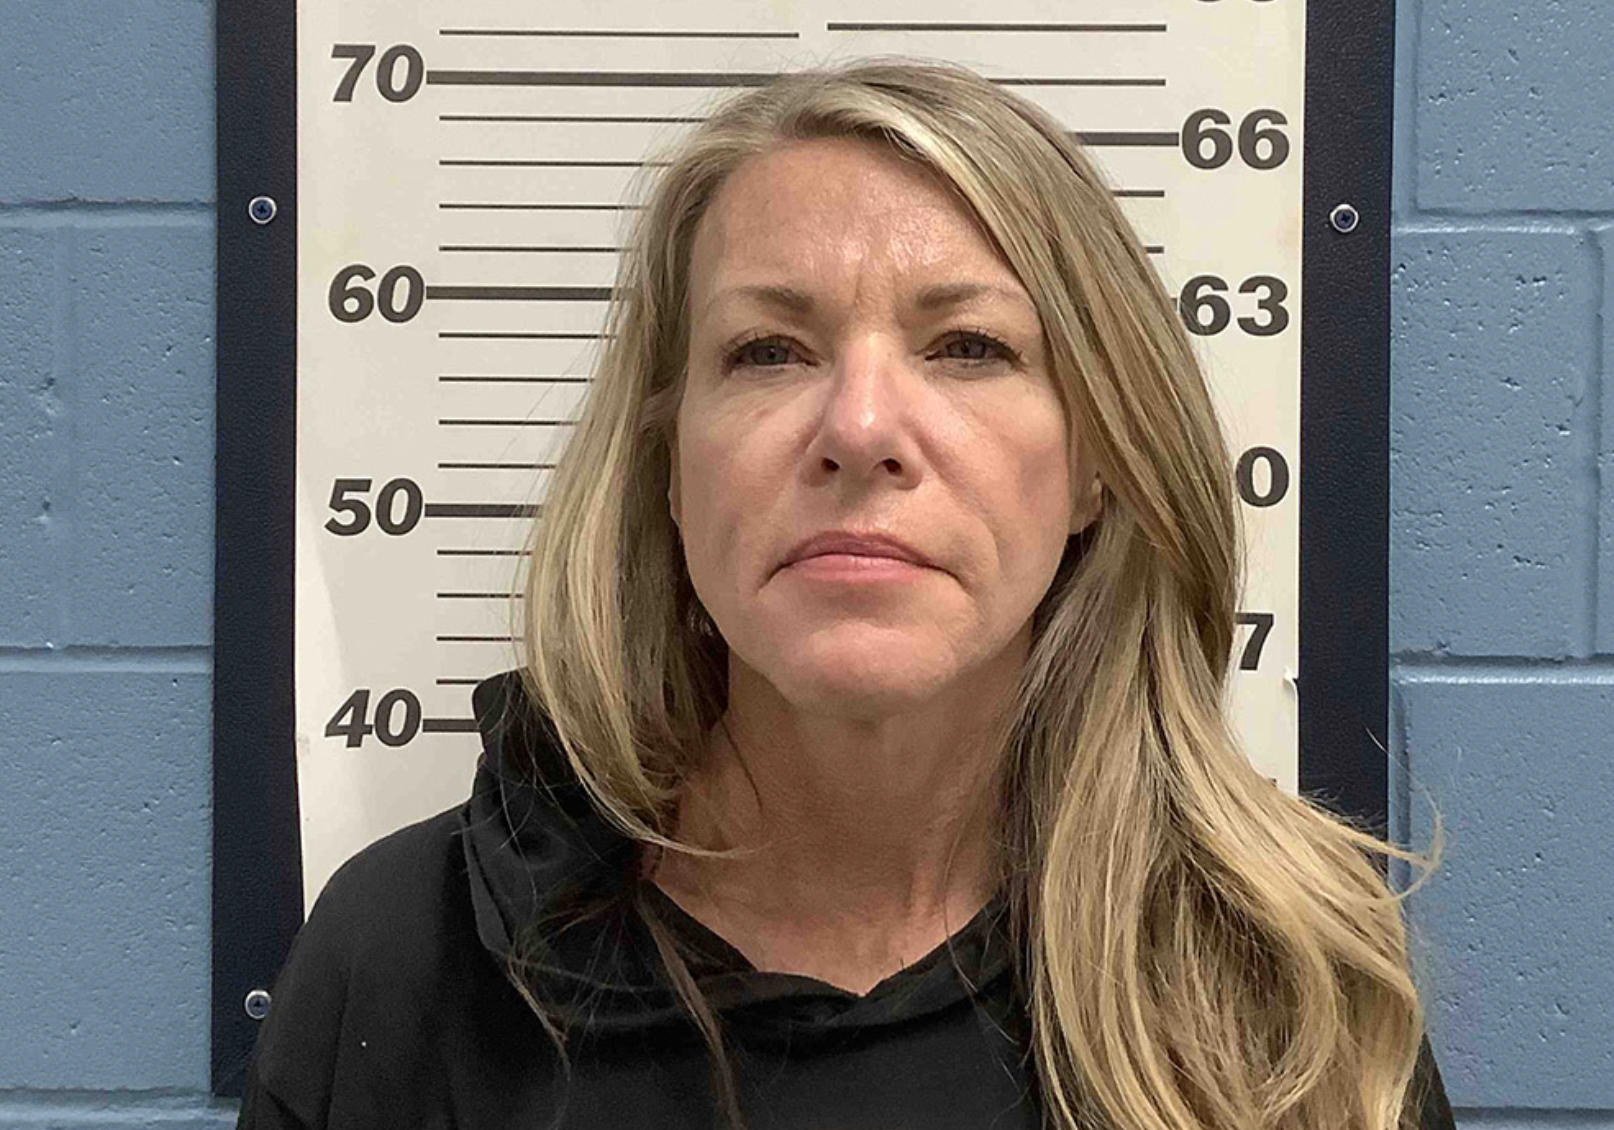 Here’s What To Know About Lori Vallow Daybell, The ‘Doomsday Mom’ Charged With Killing Her Children